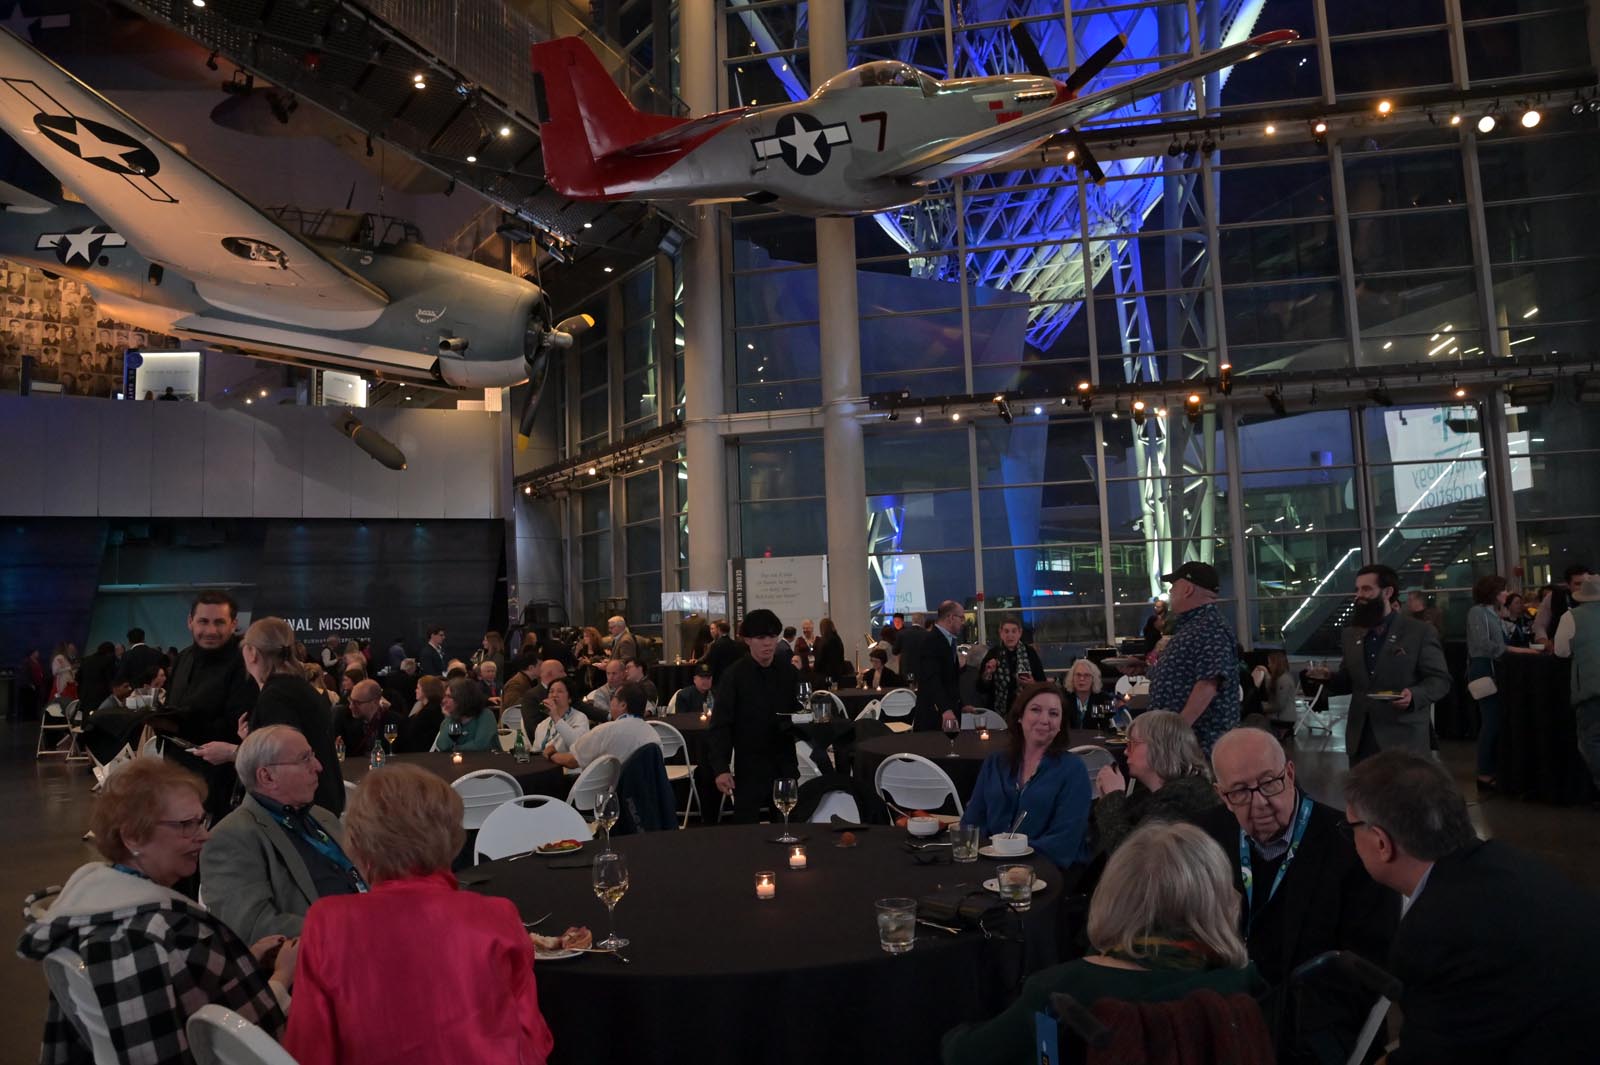 Reception at US Freedom Pavilion of the National World War II